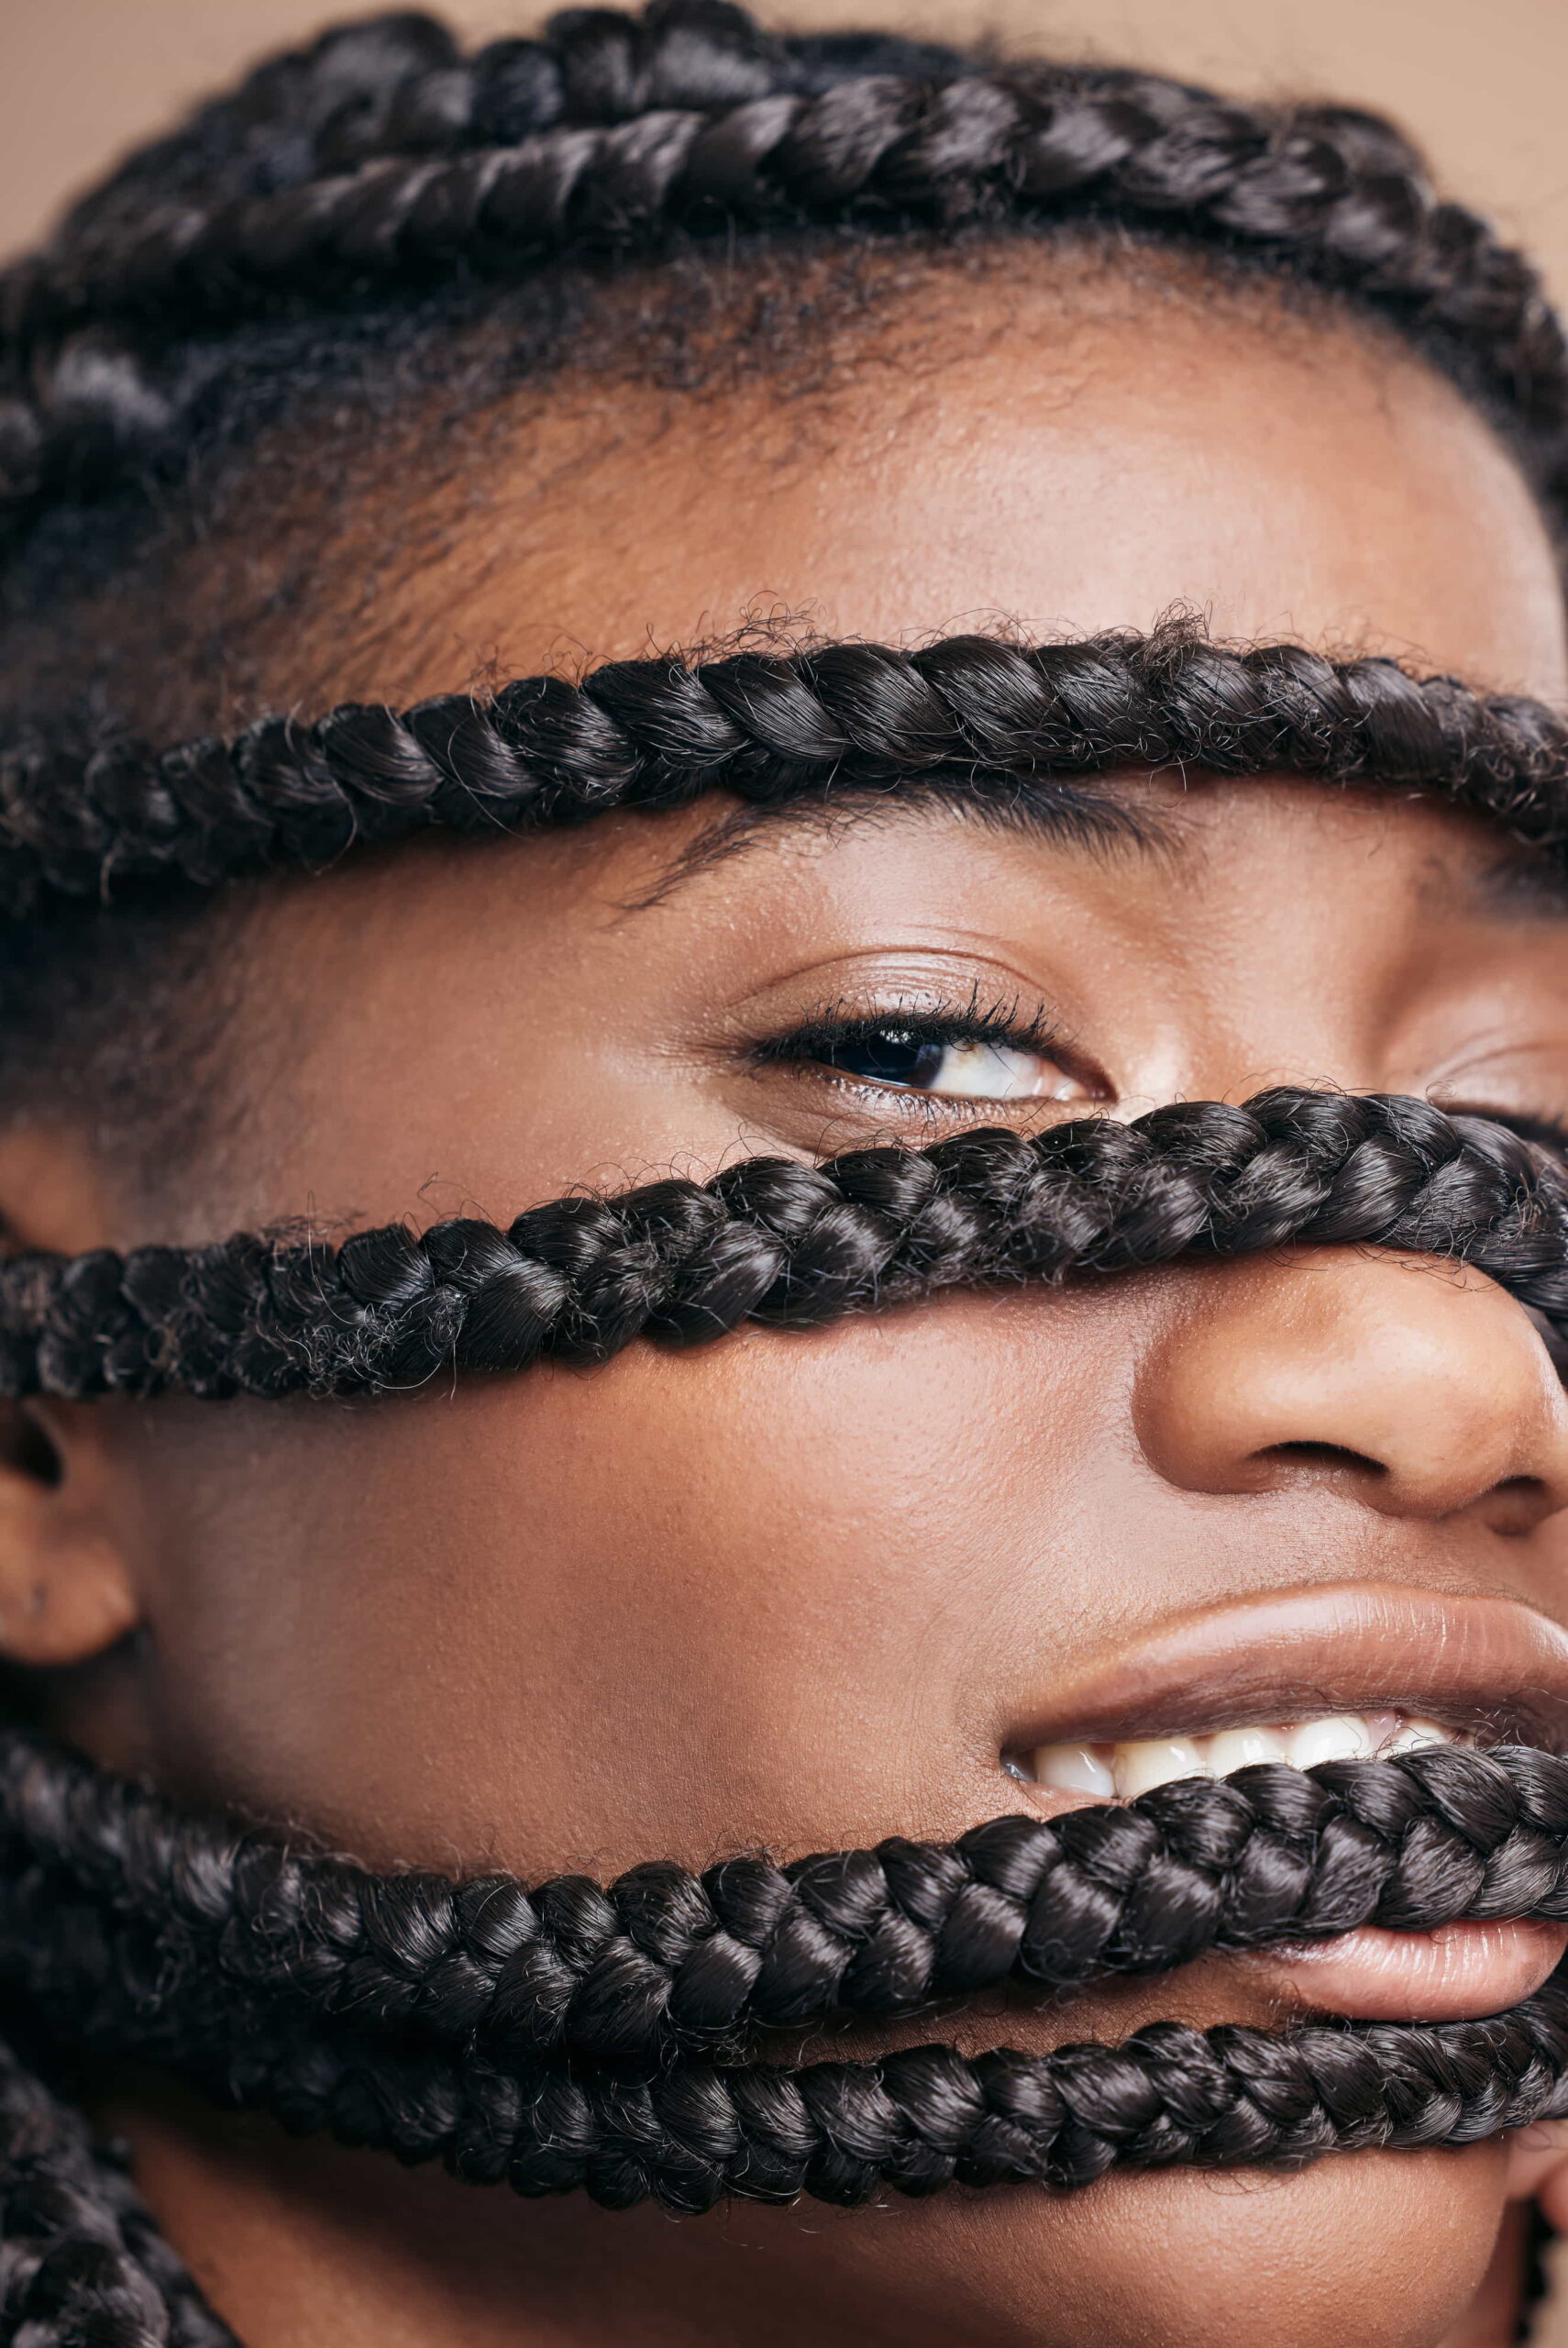 A cropped portrait of a woman posing in a studio, showcasing her braids